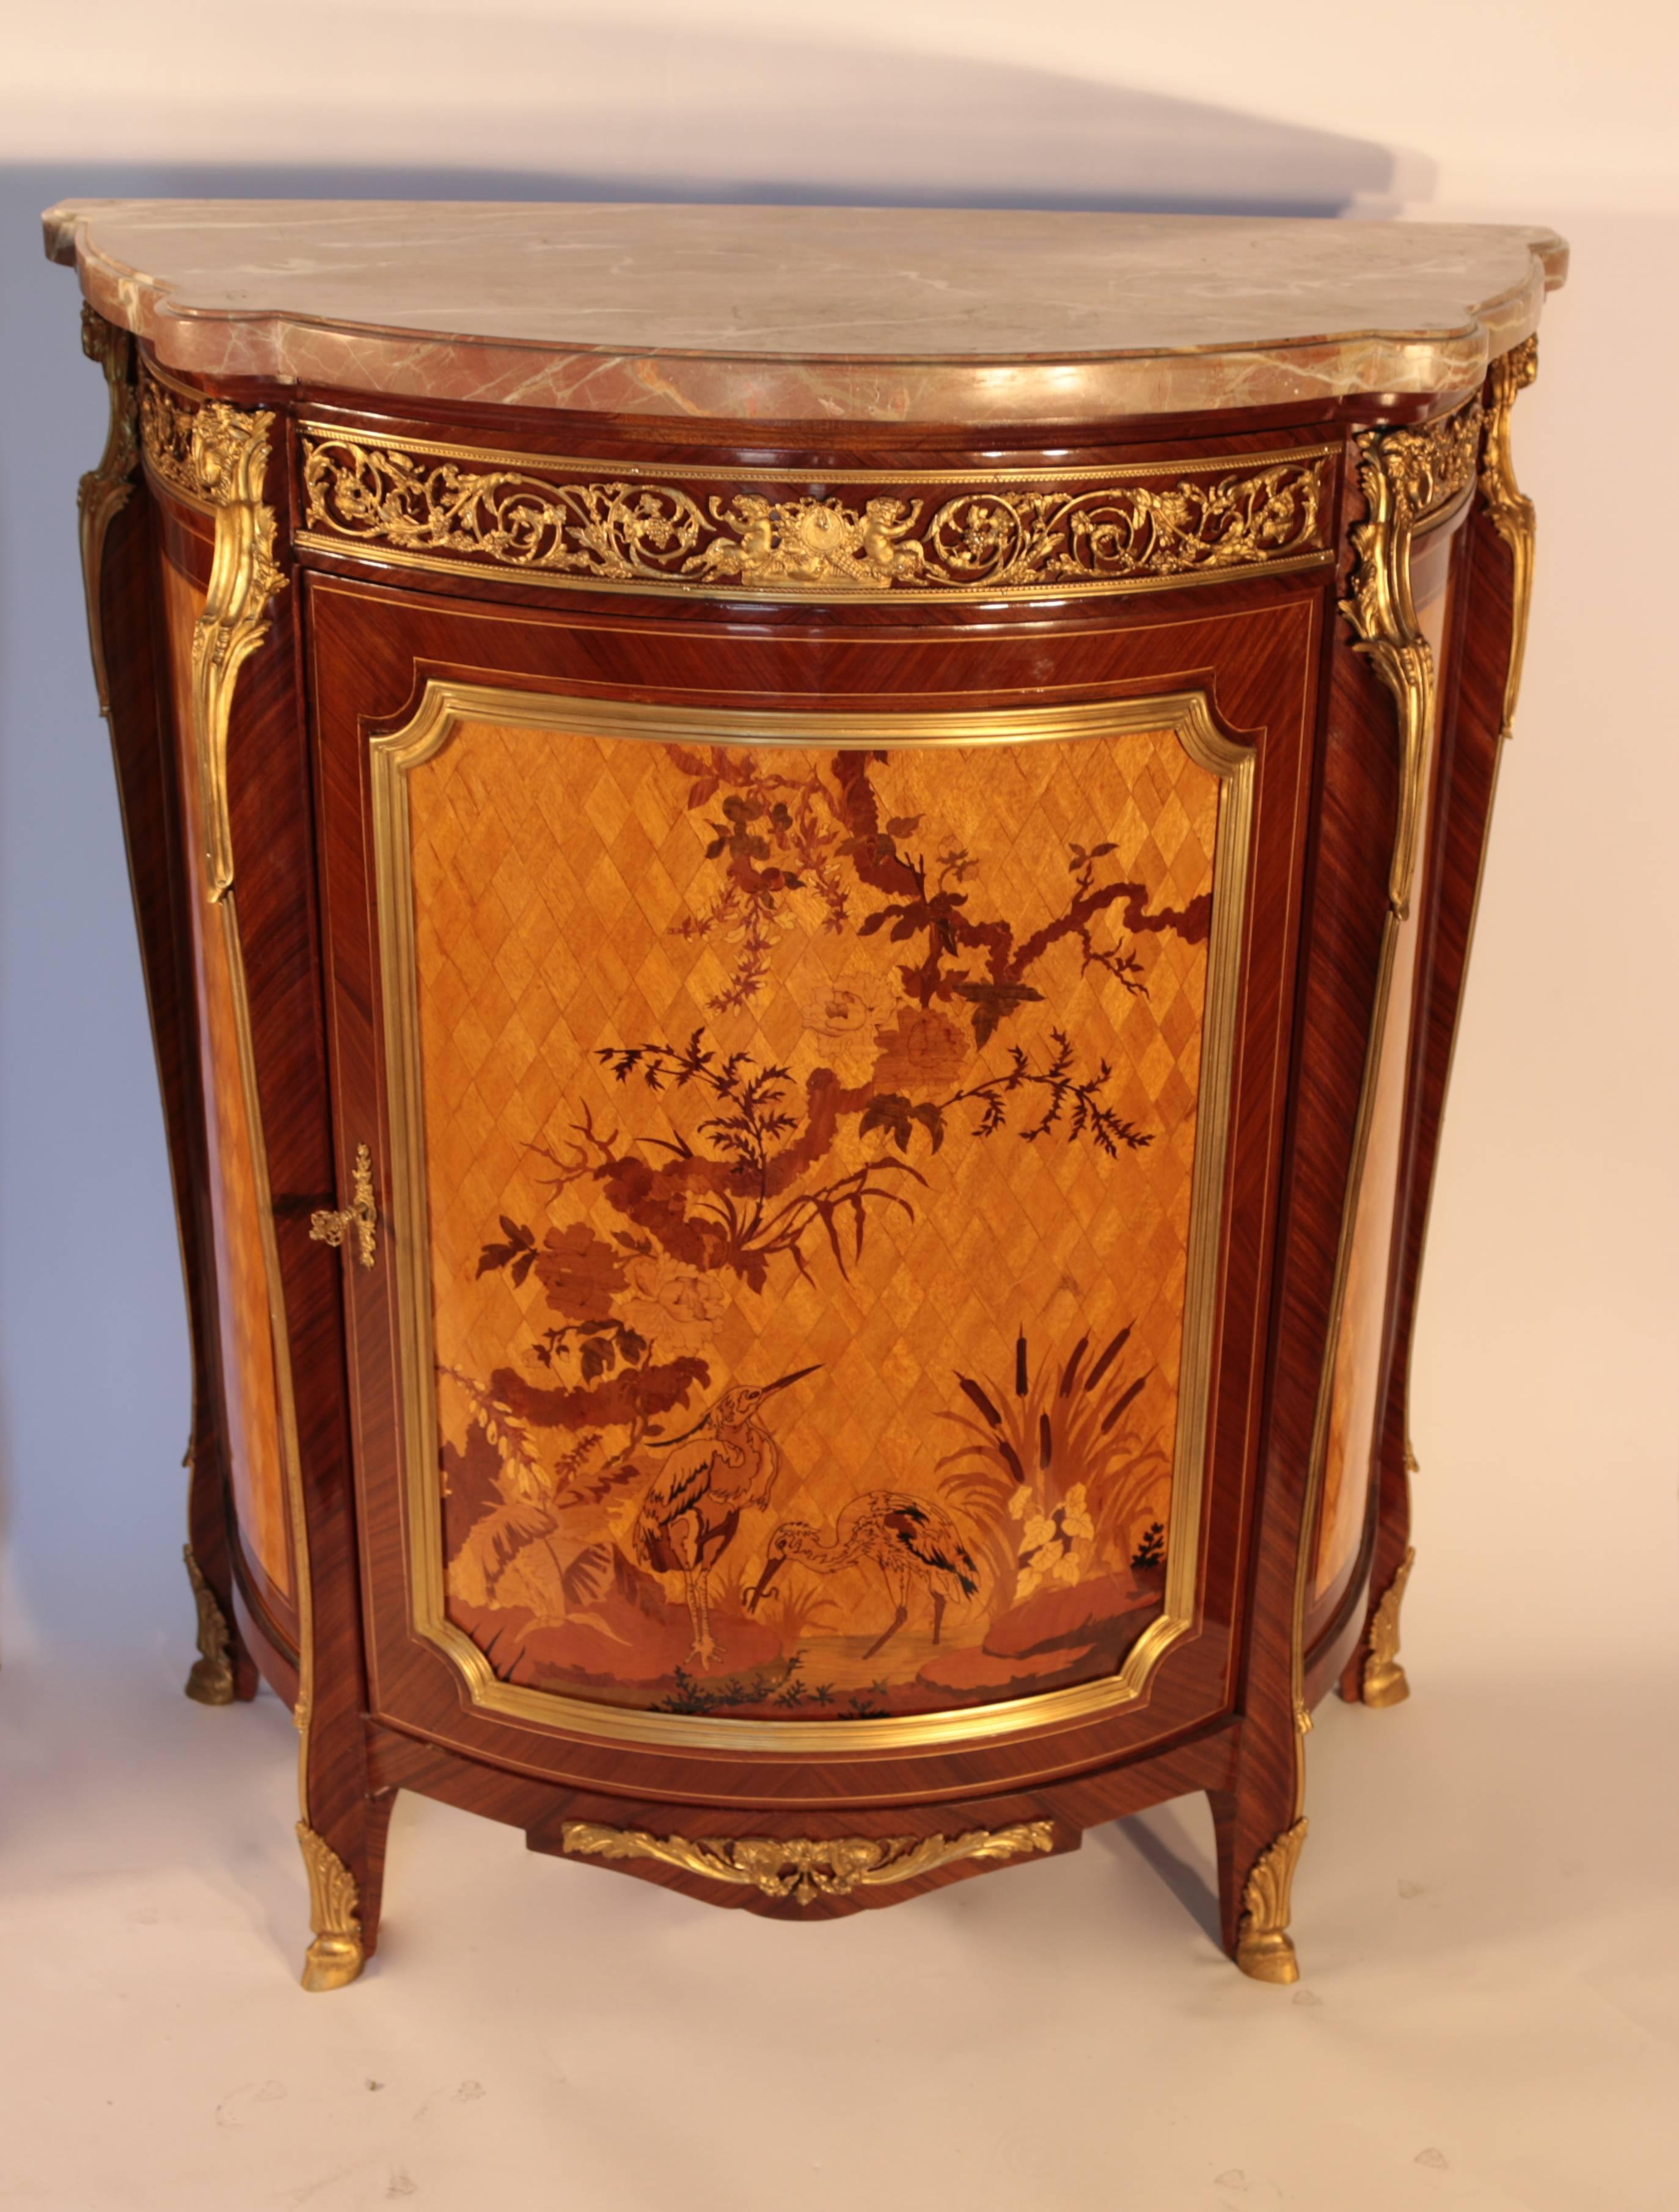 Pair of elegant French style marble-top demilune cabinets with excellent ormolu-mounted to bronze with highly detailed inlay Francois Linke quality.
In excellent used condition.
    